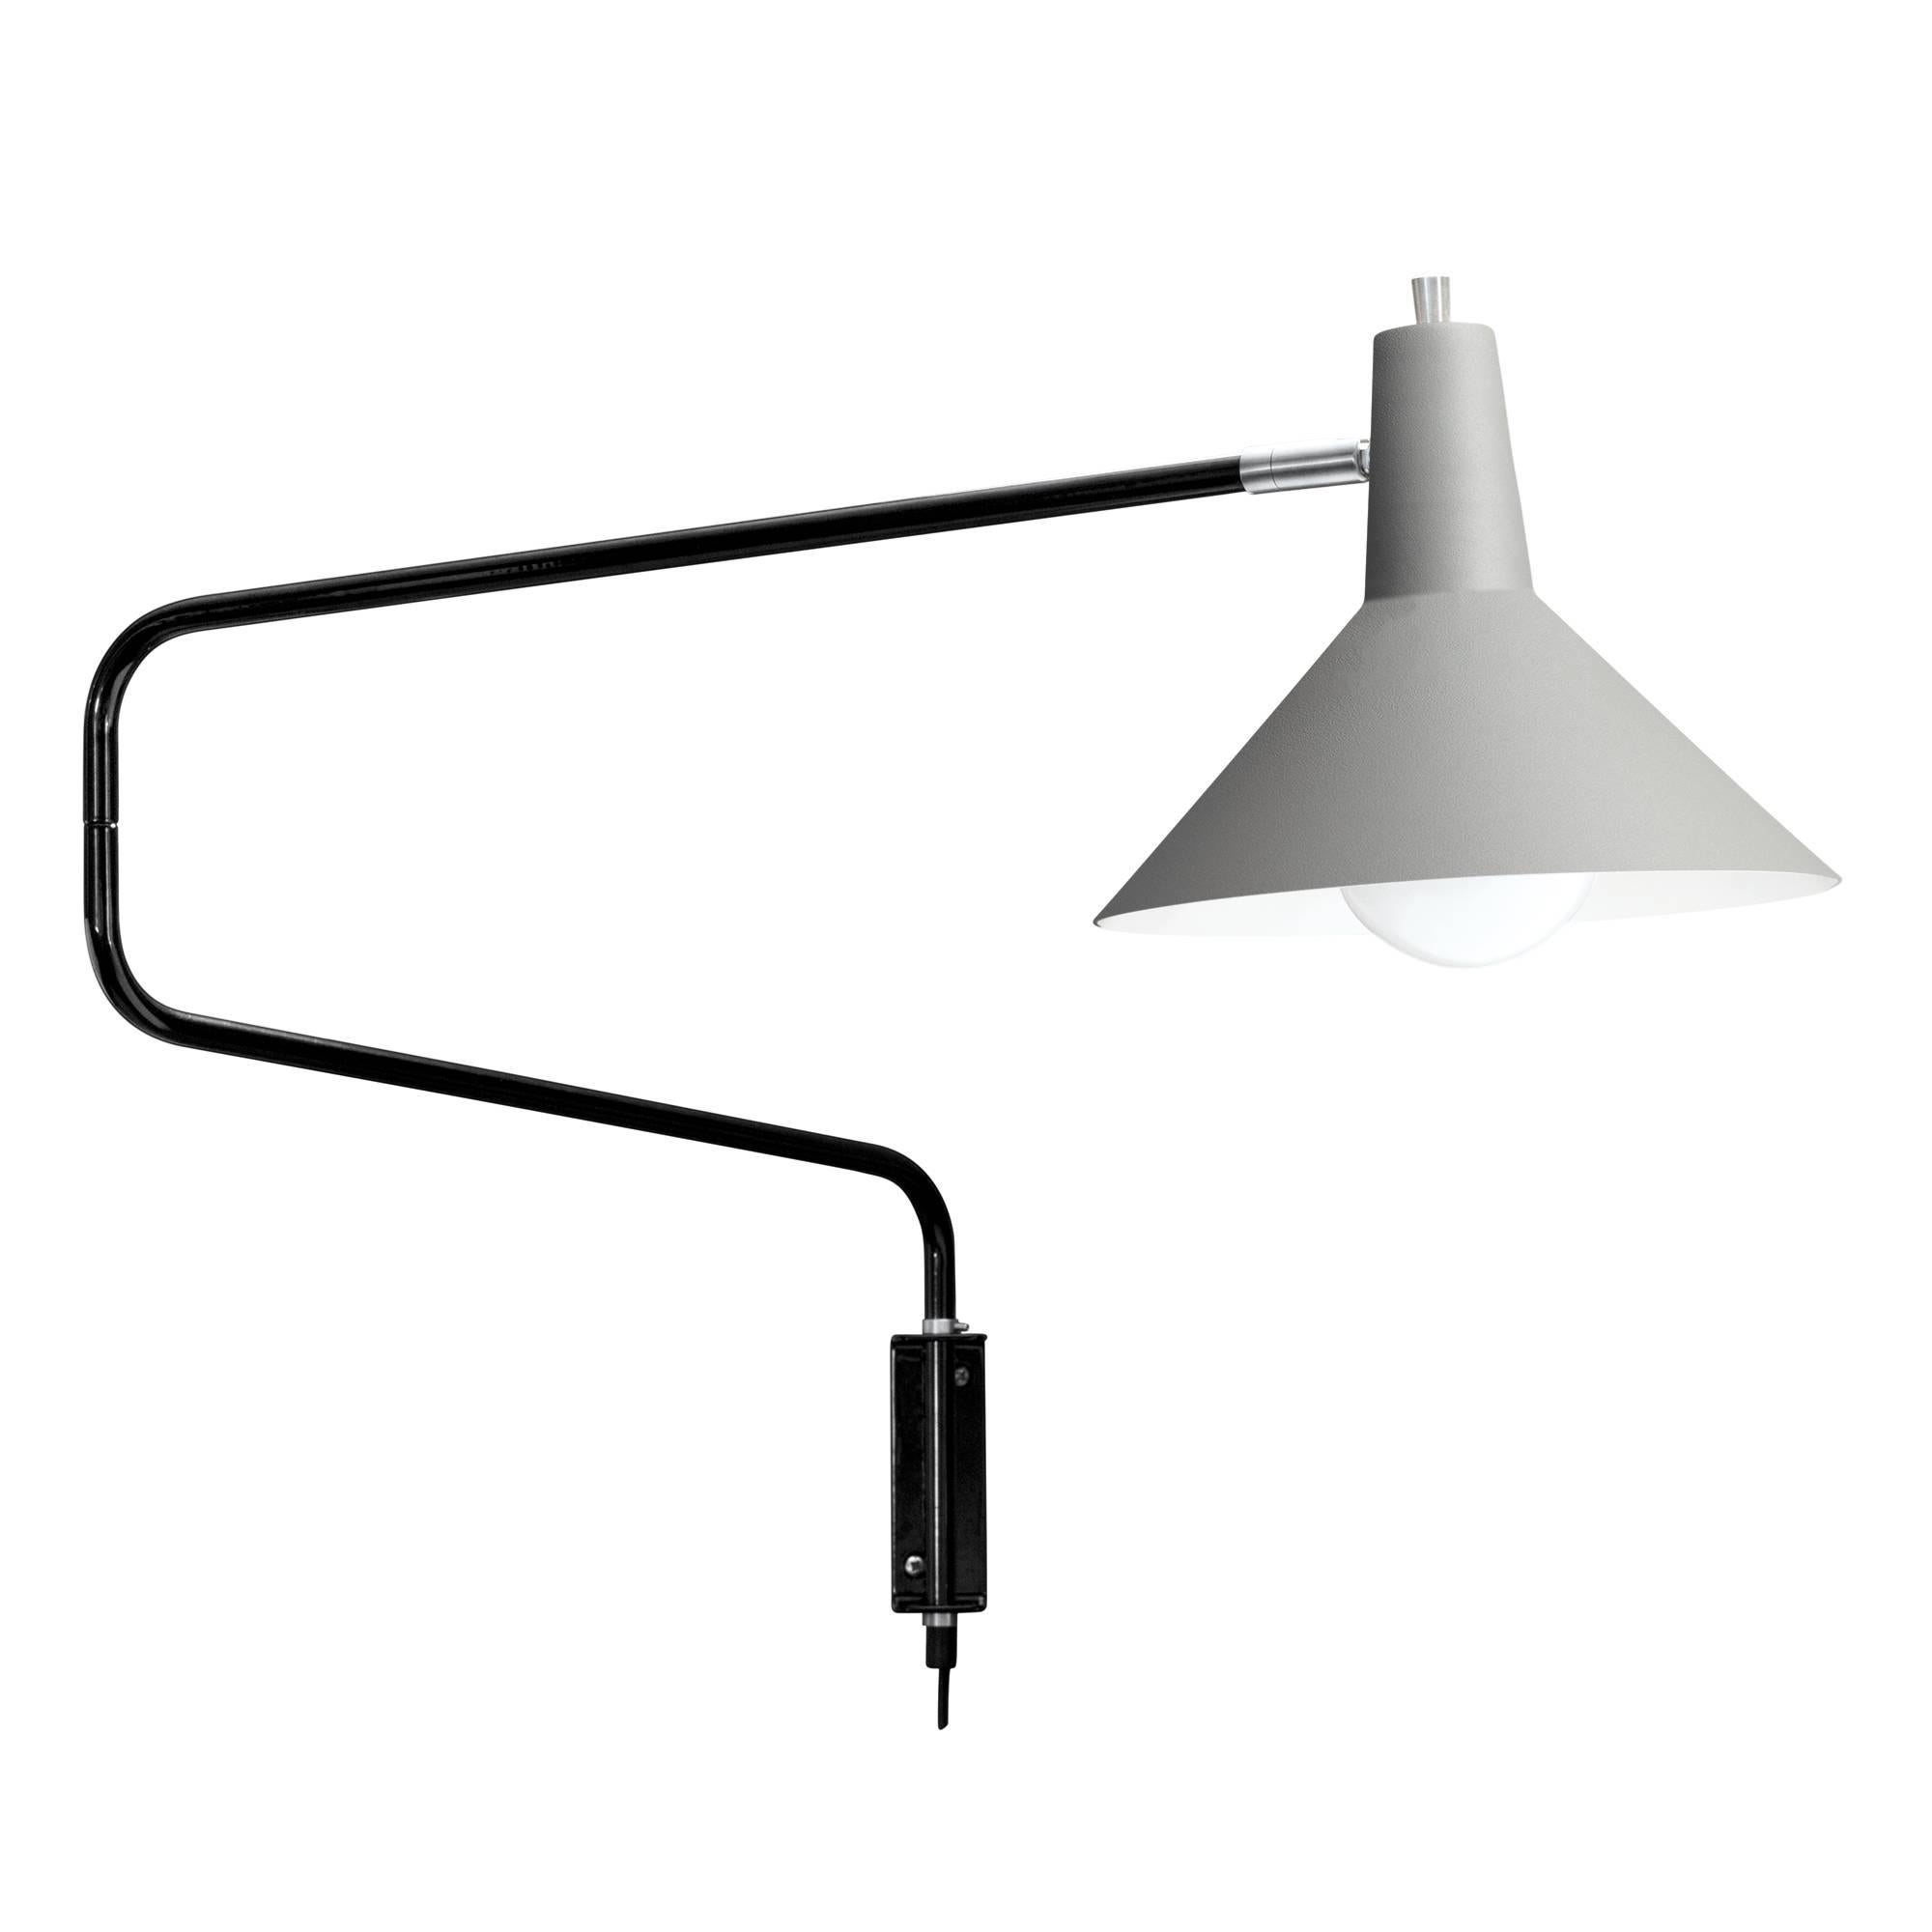 J.J.M. Hoogervorst black paperclip wall light for Anvia. Hoogervorst's most popular, 1950s design, this lamp remains a highly sought after icon of Dutch modernism. The 'elbow' arm when folded measures 27.5 in. wide, but can be extended to a maximum